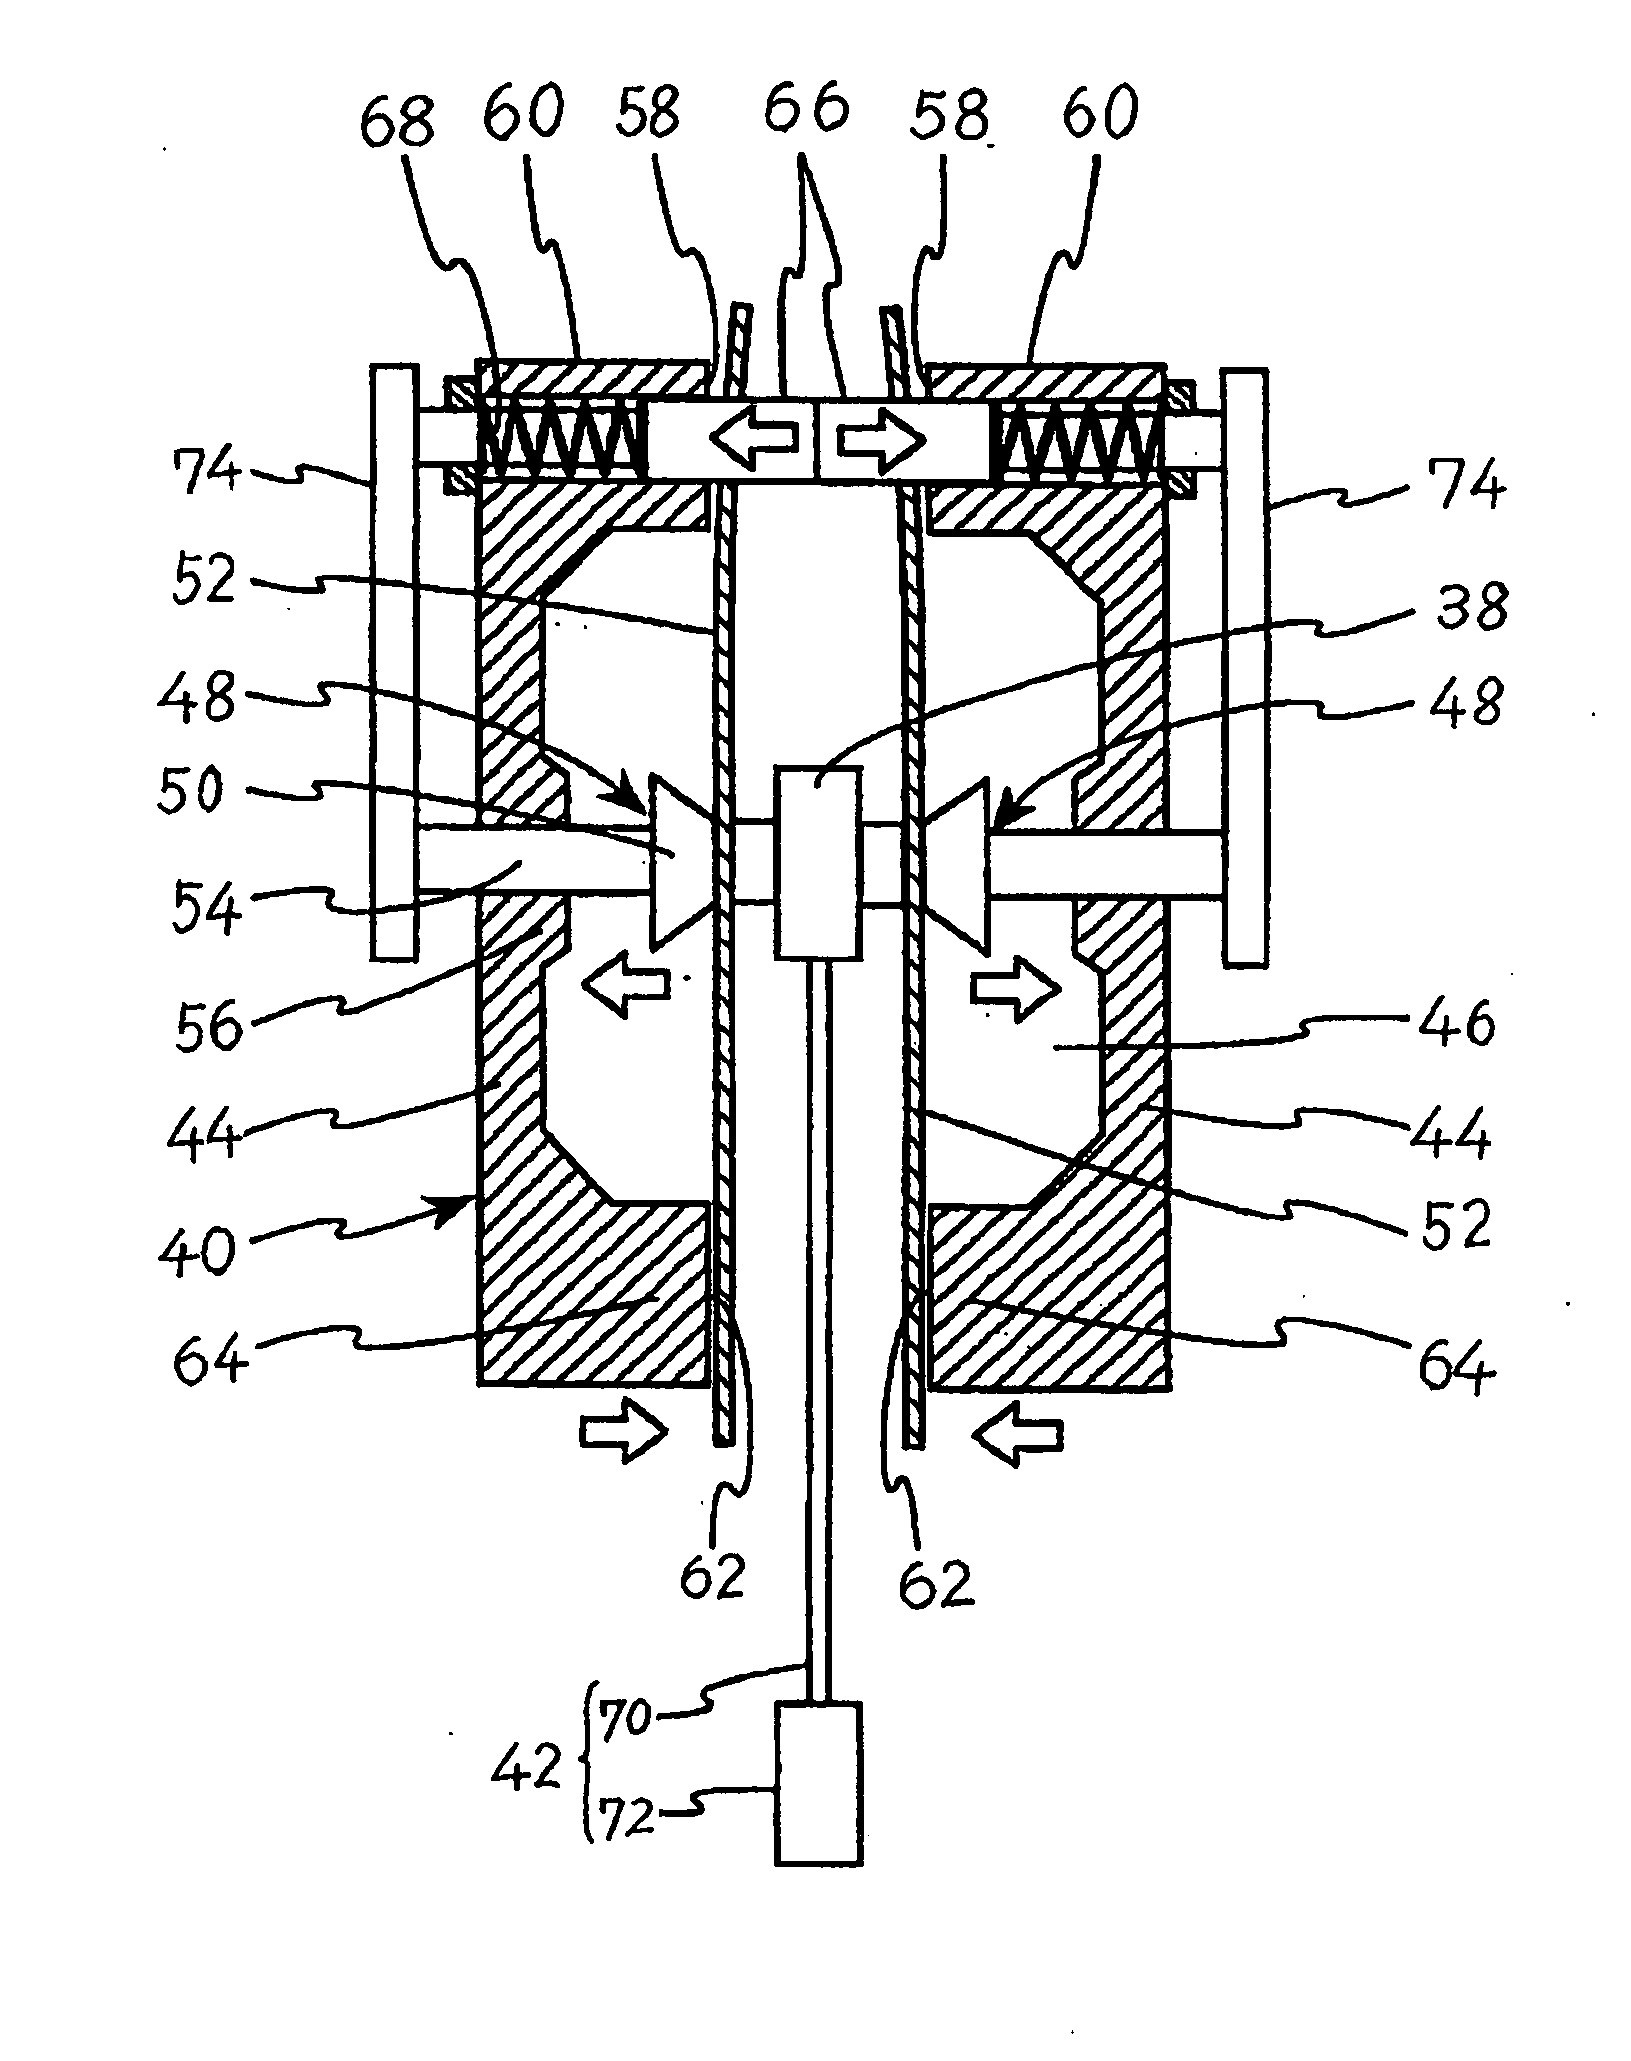 Blow molding device